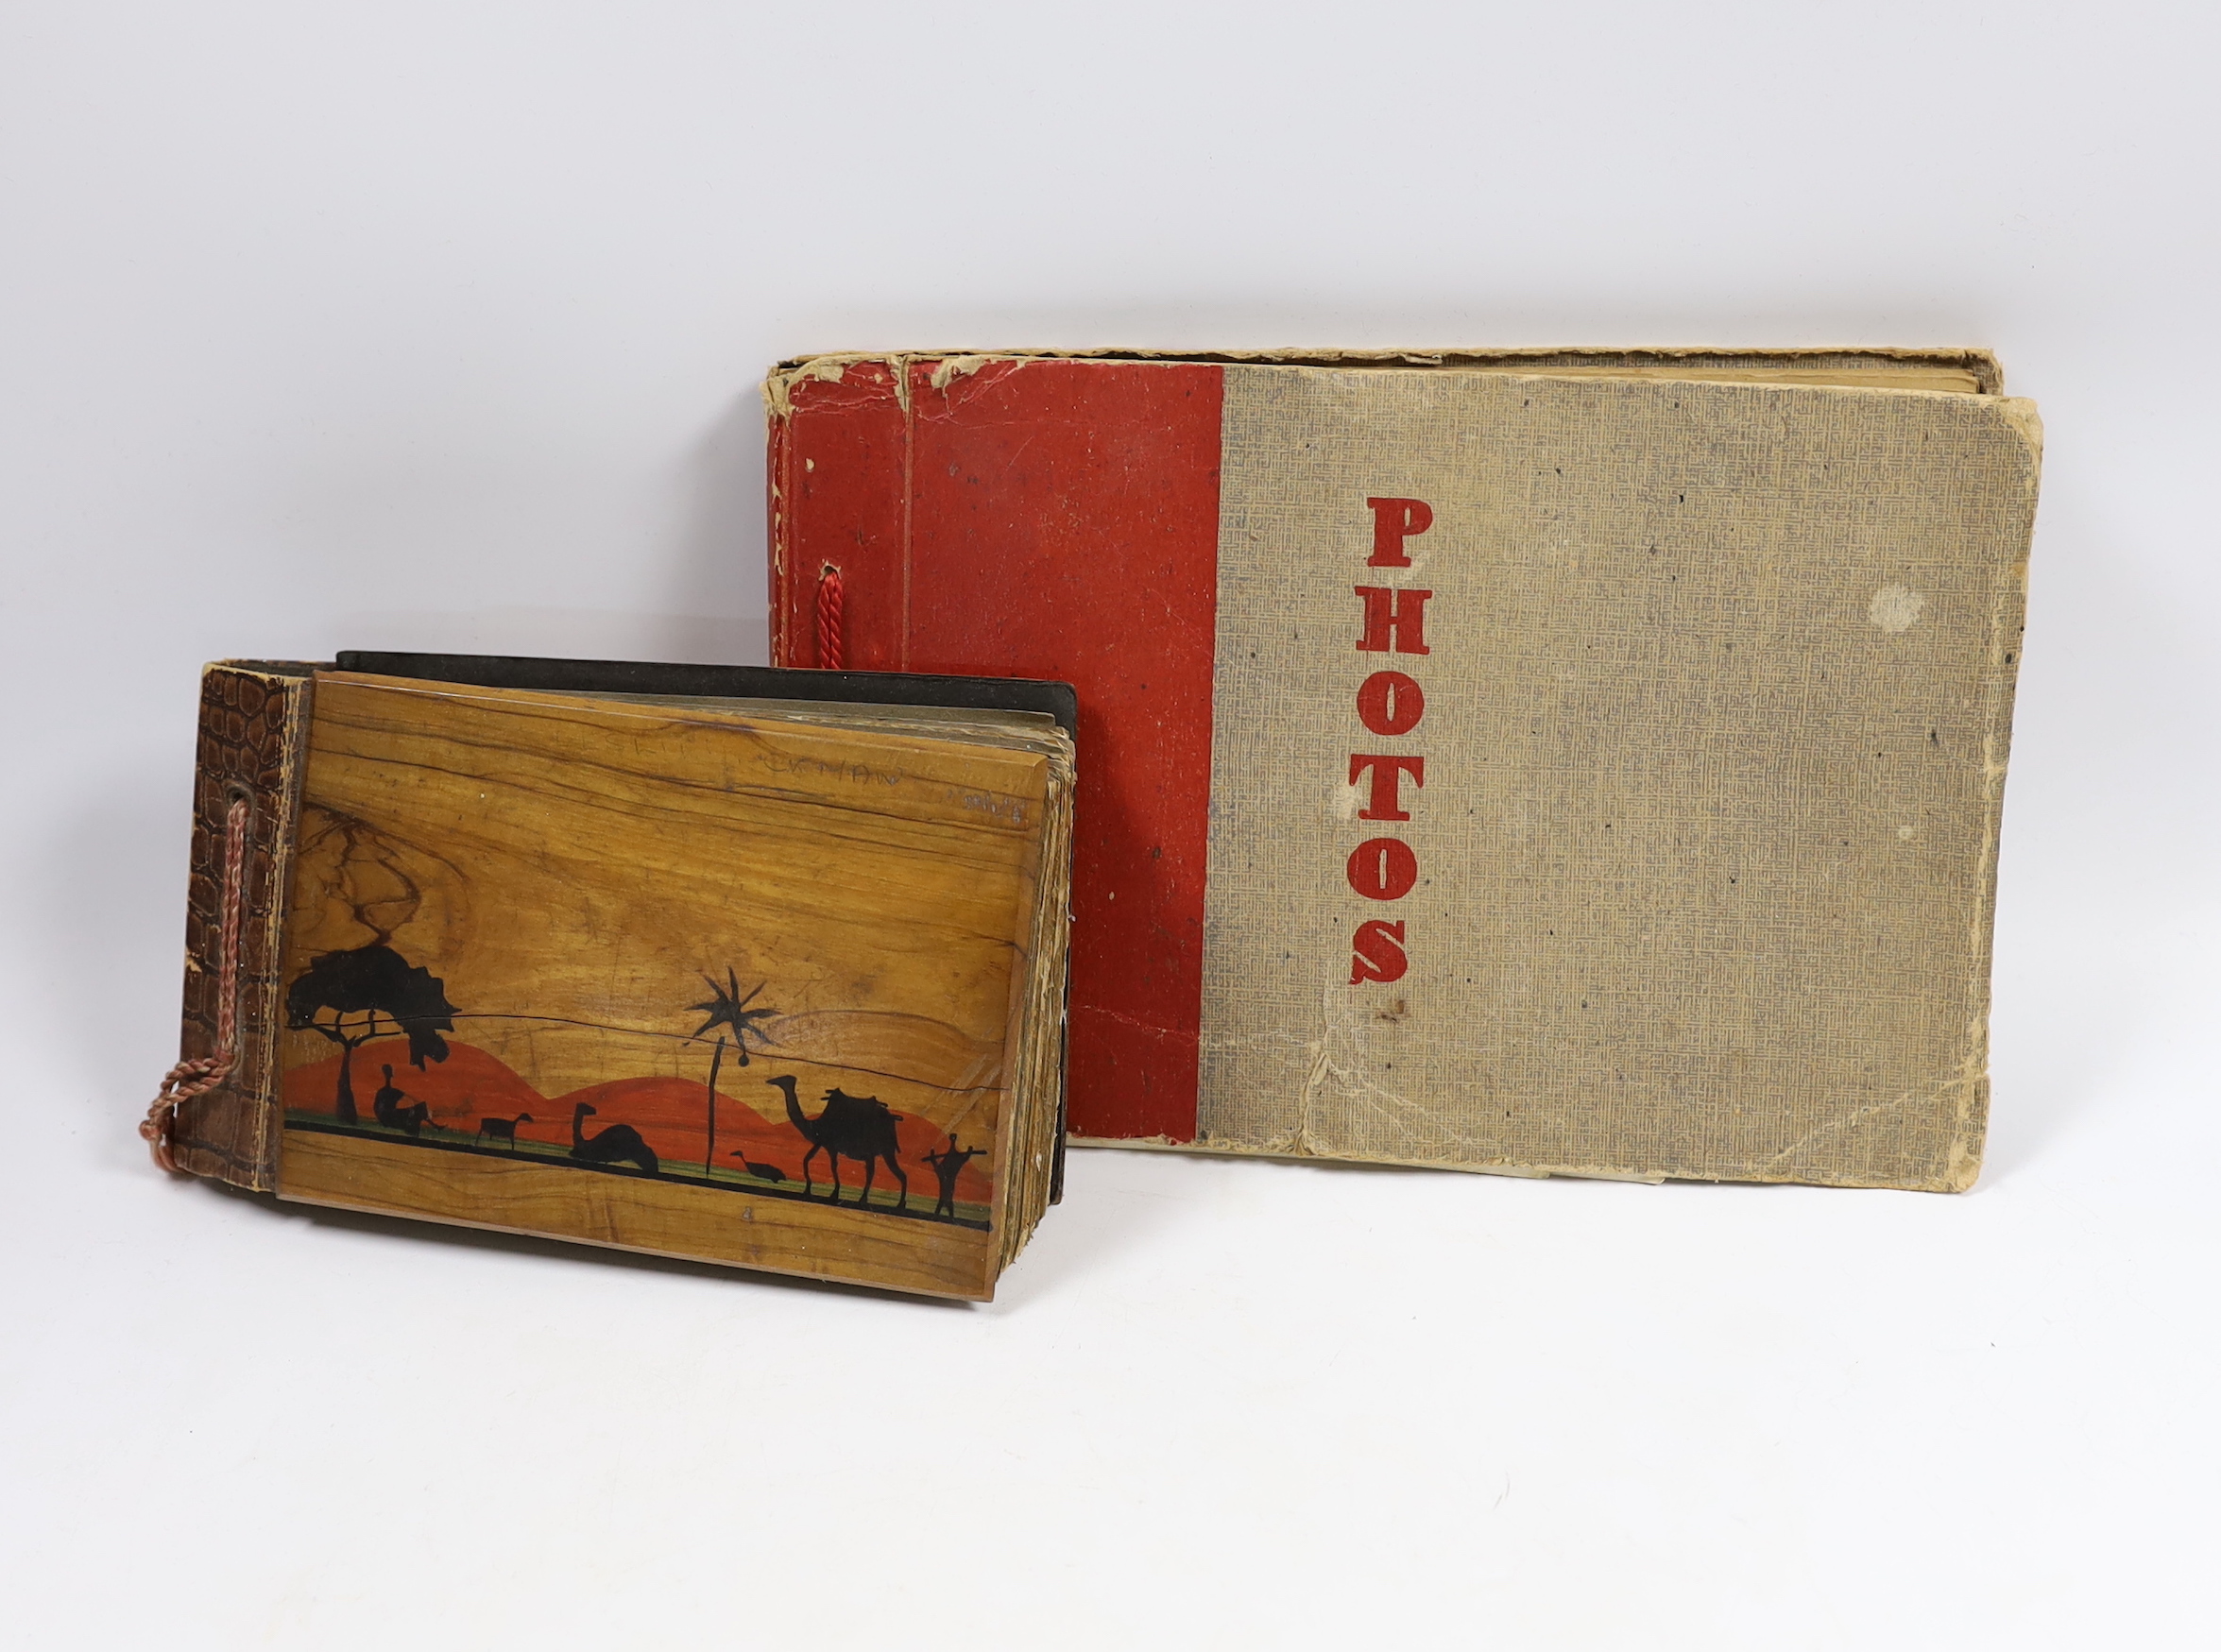 Two photographs albums; an album of early 20th century Middle Eastern travel photographs, together with a 1940s album of mainly naval photographs including war ships and aircraft carriers, some with descriptions on the r